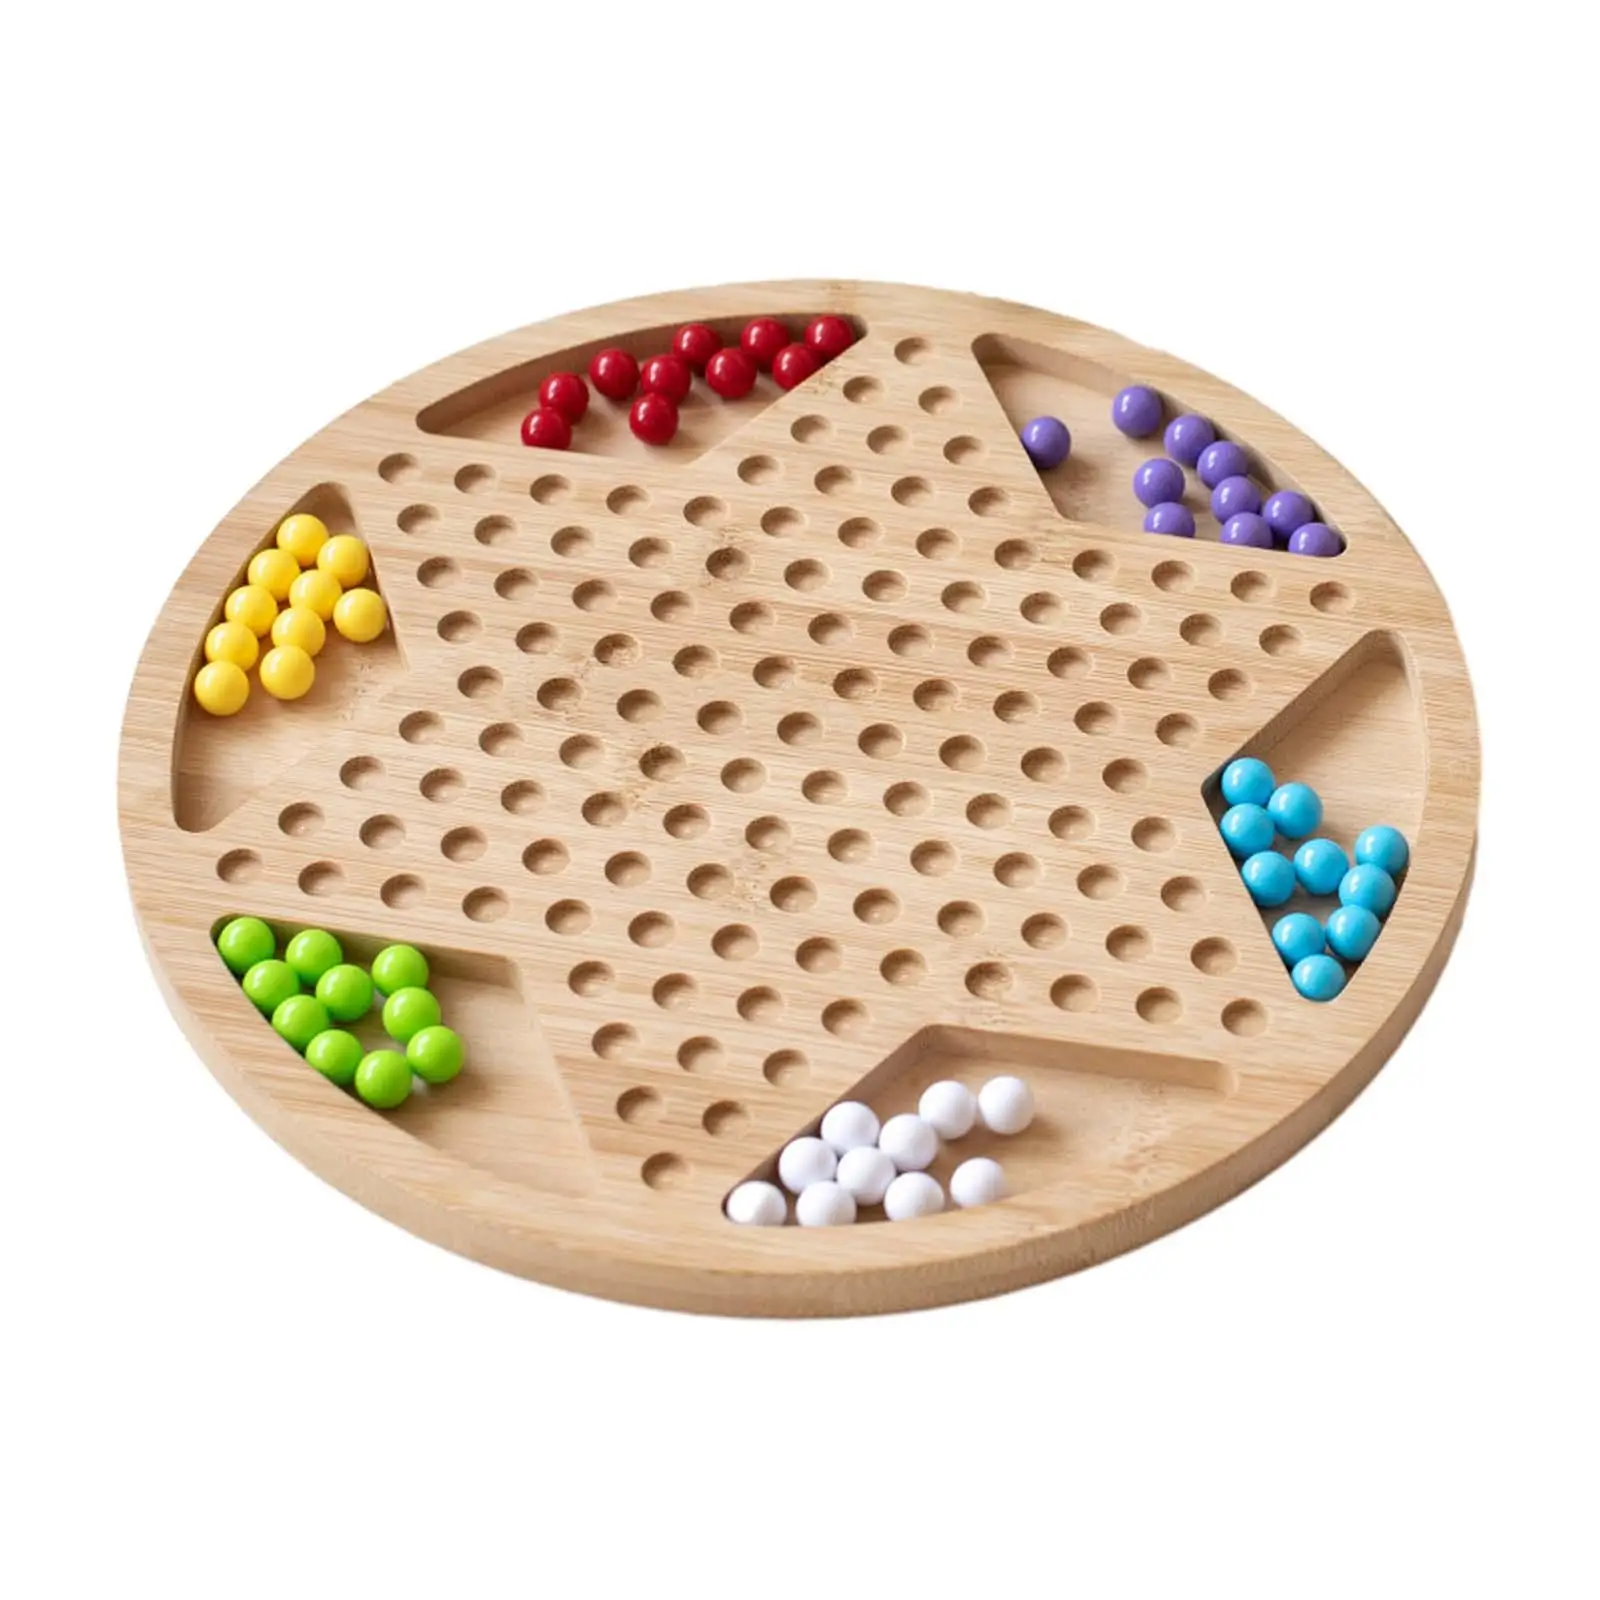 Chinese Checkers 29cm Wooden Board and Traditional Pegs with 60 Marbles Family Board Game for Family Gathering Boys Girls Adults